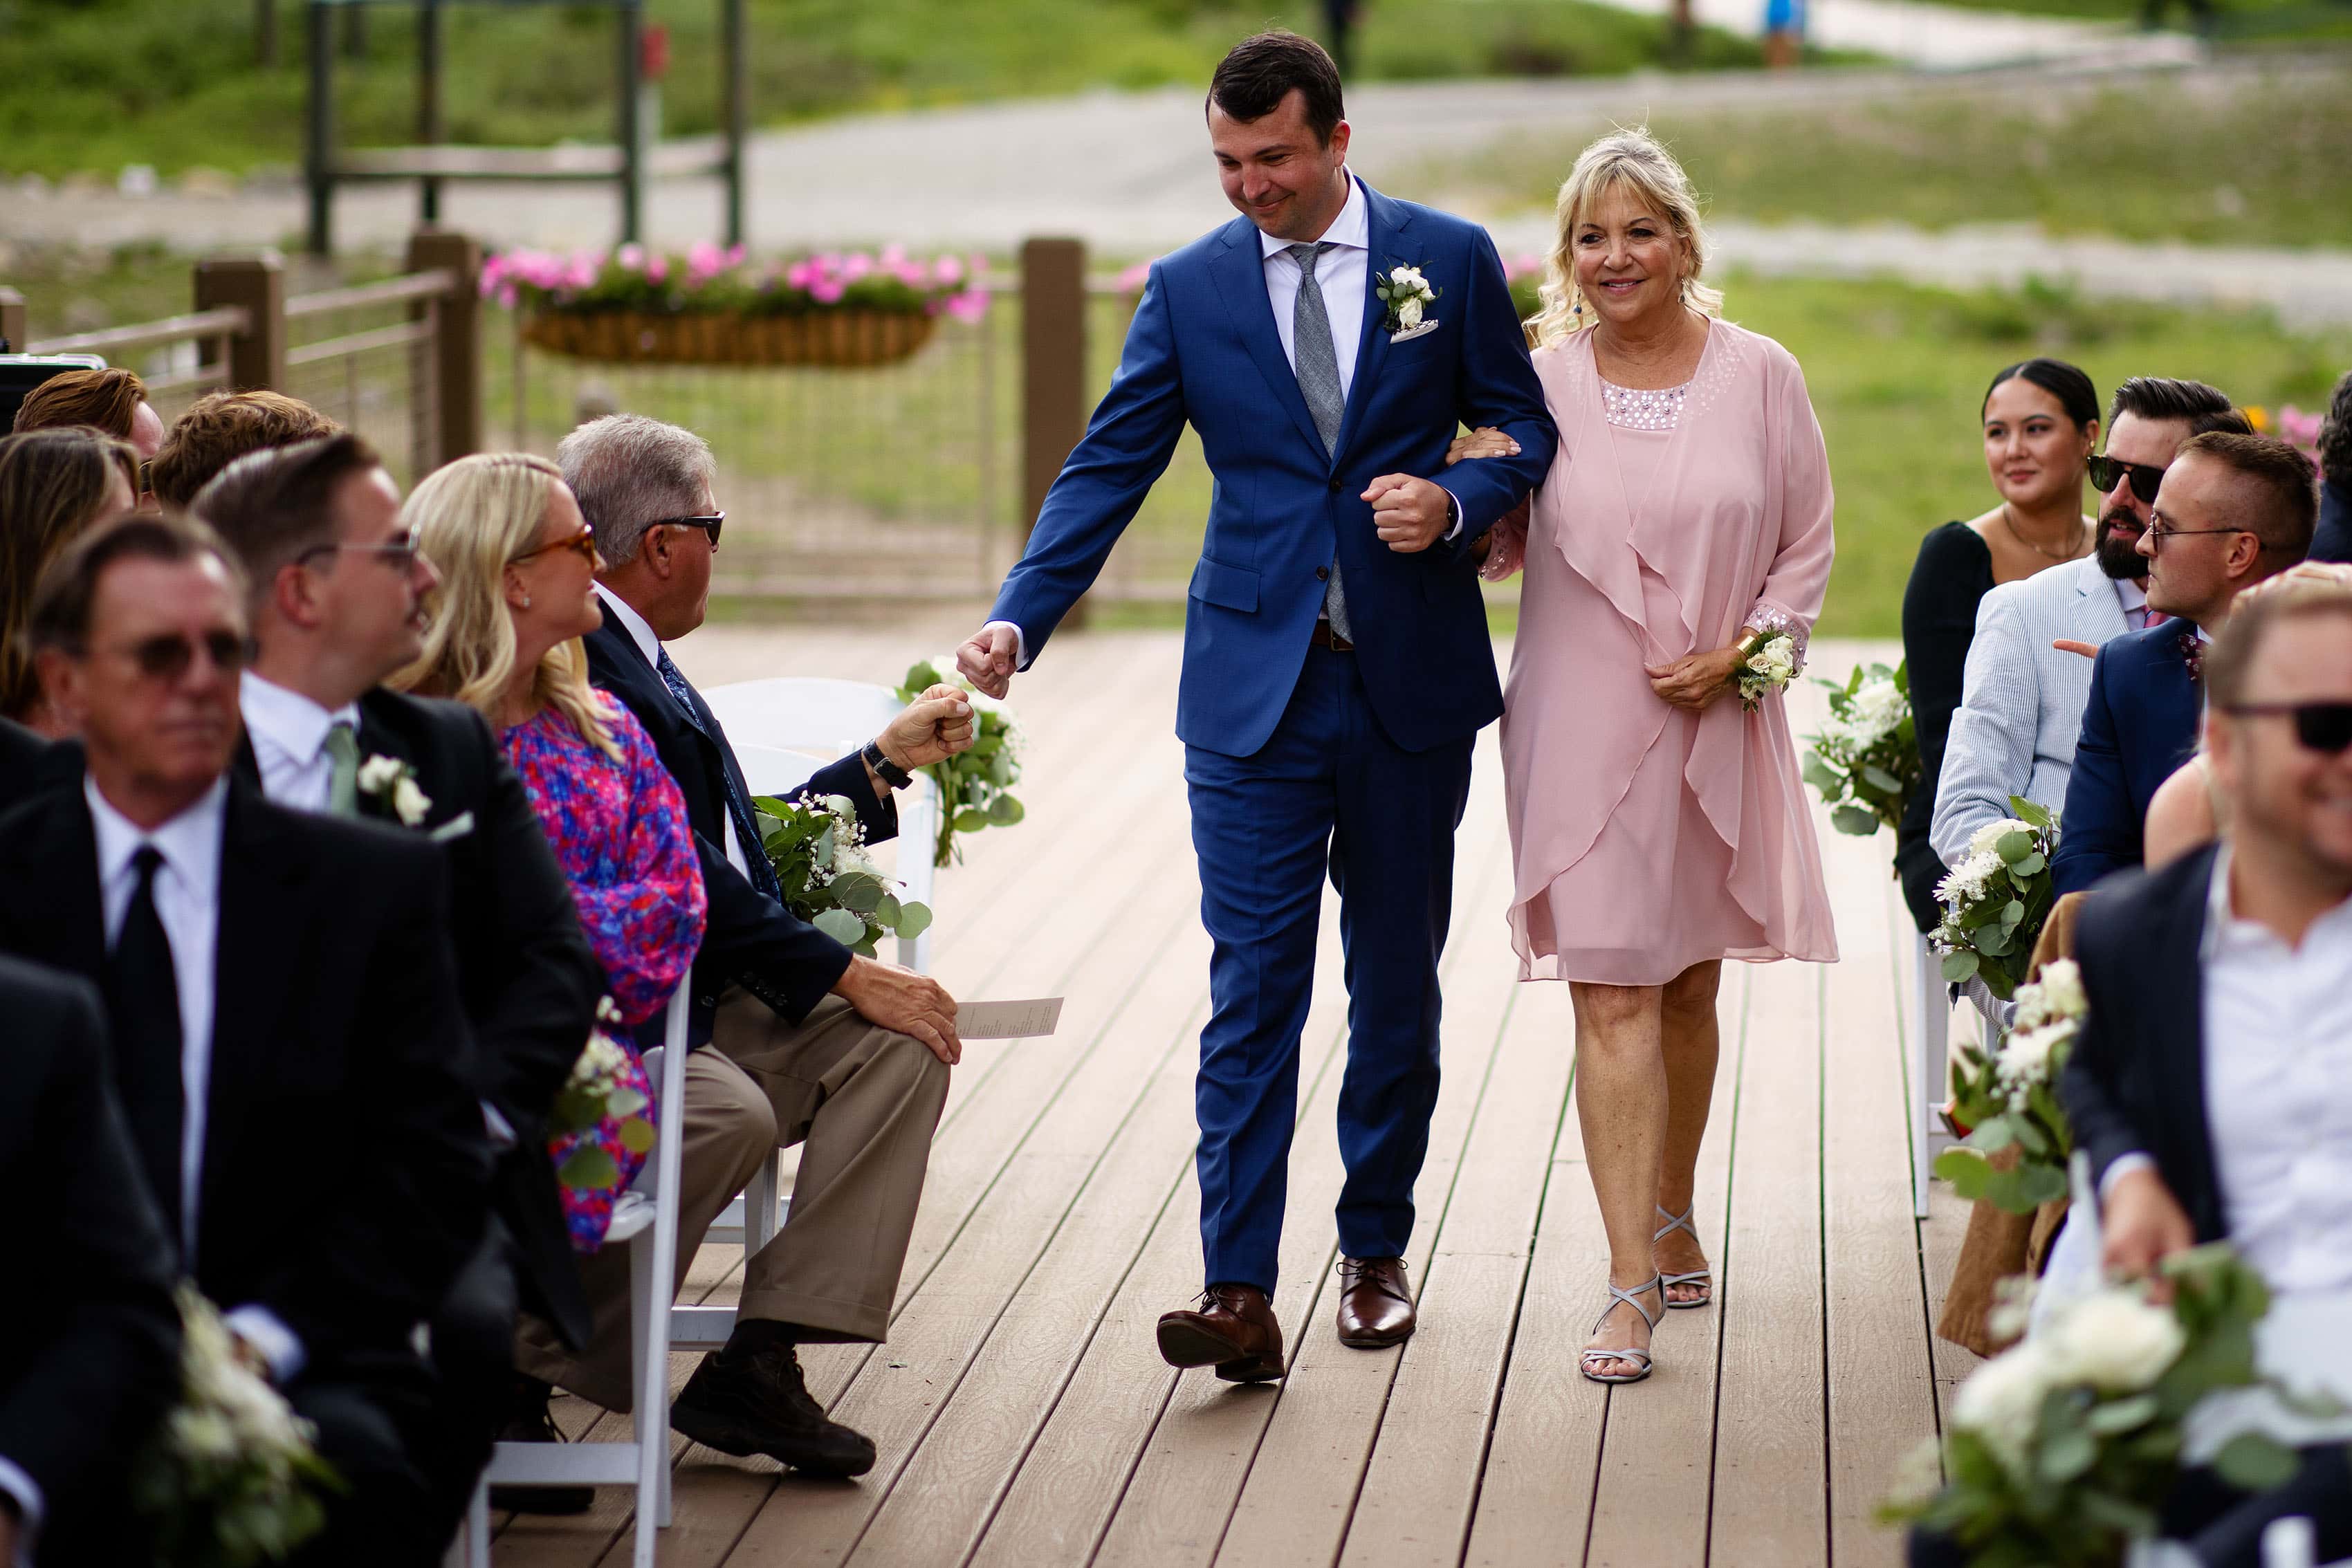 The groom gets a fist bump as he walks down the aisle with his mother